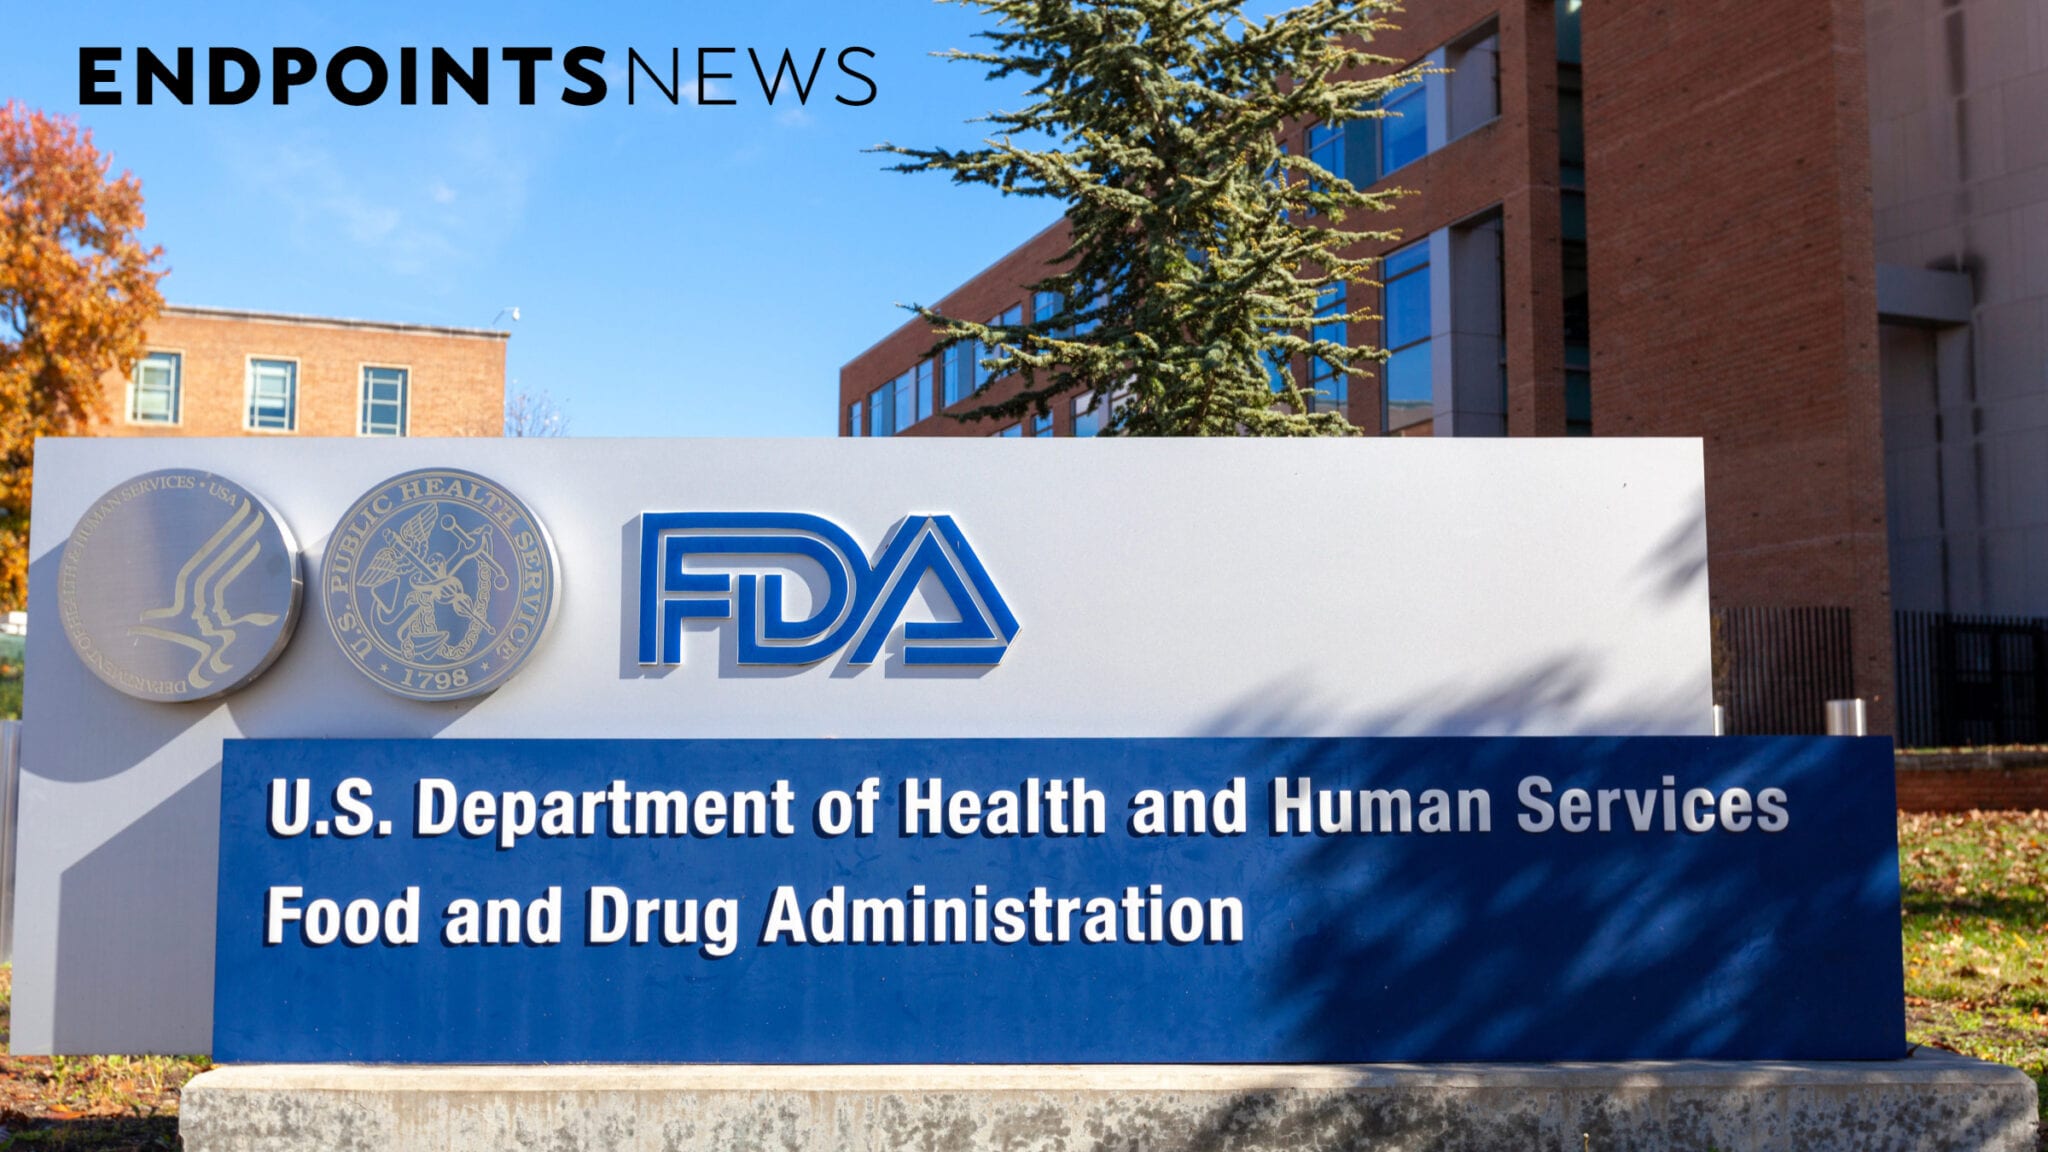 FDA loses FOIA suit over Pfizer vaccine documents, must release 55,000 pages per month – Endpoints News